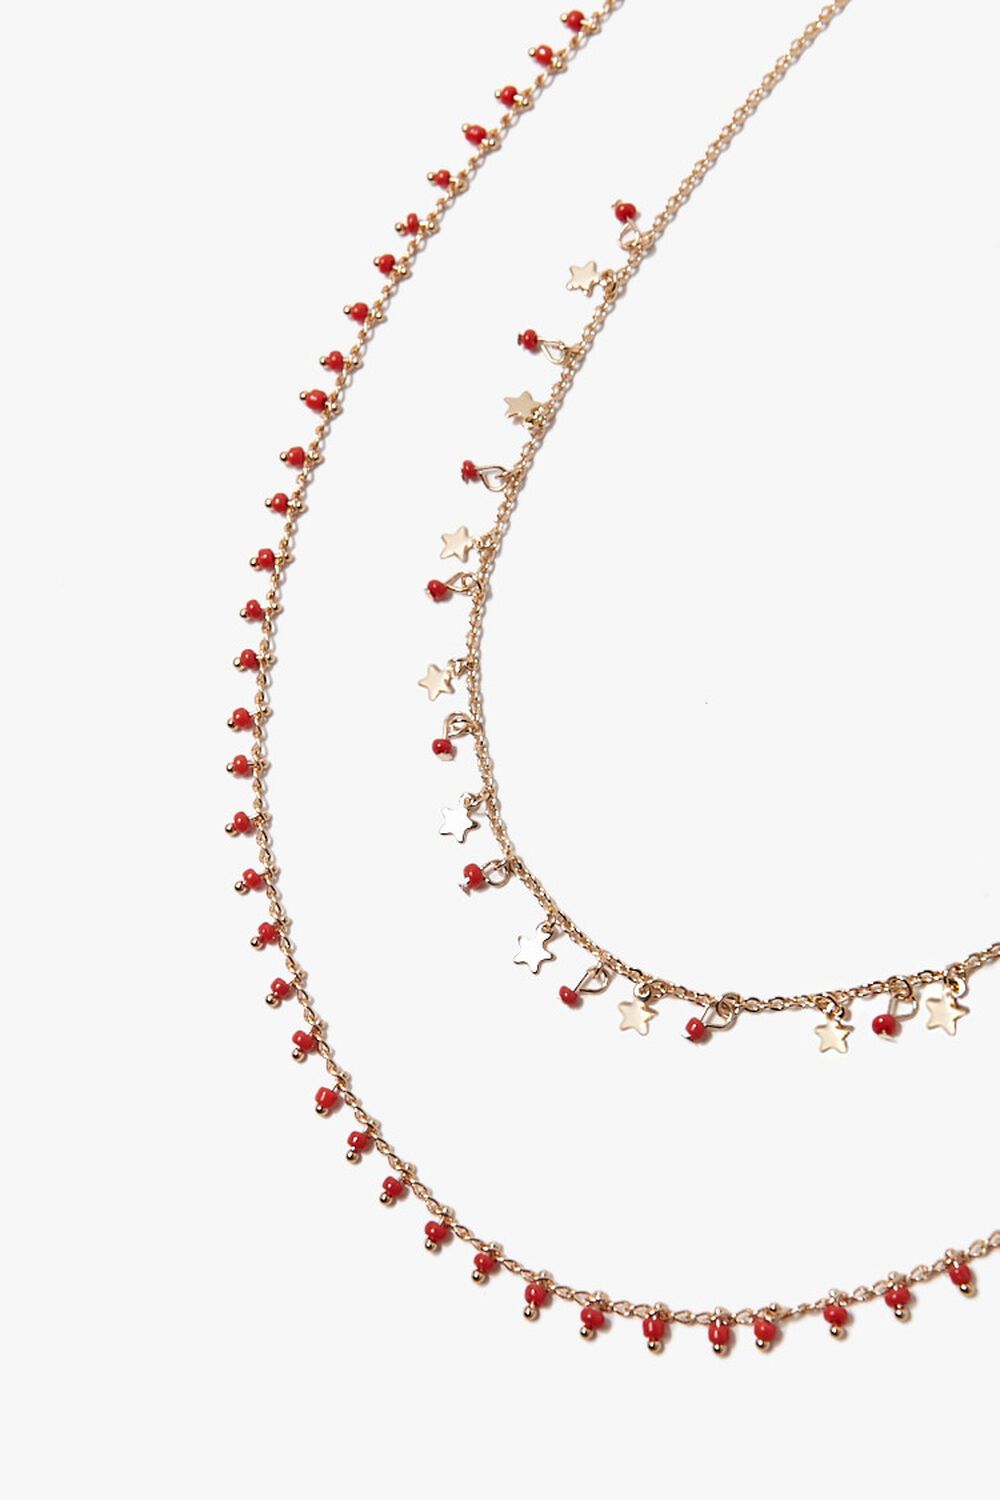 GOLD/RED Beaded Necklace Set, image 1